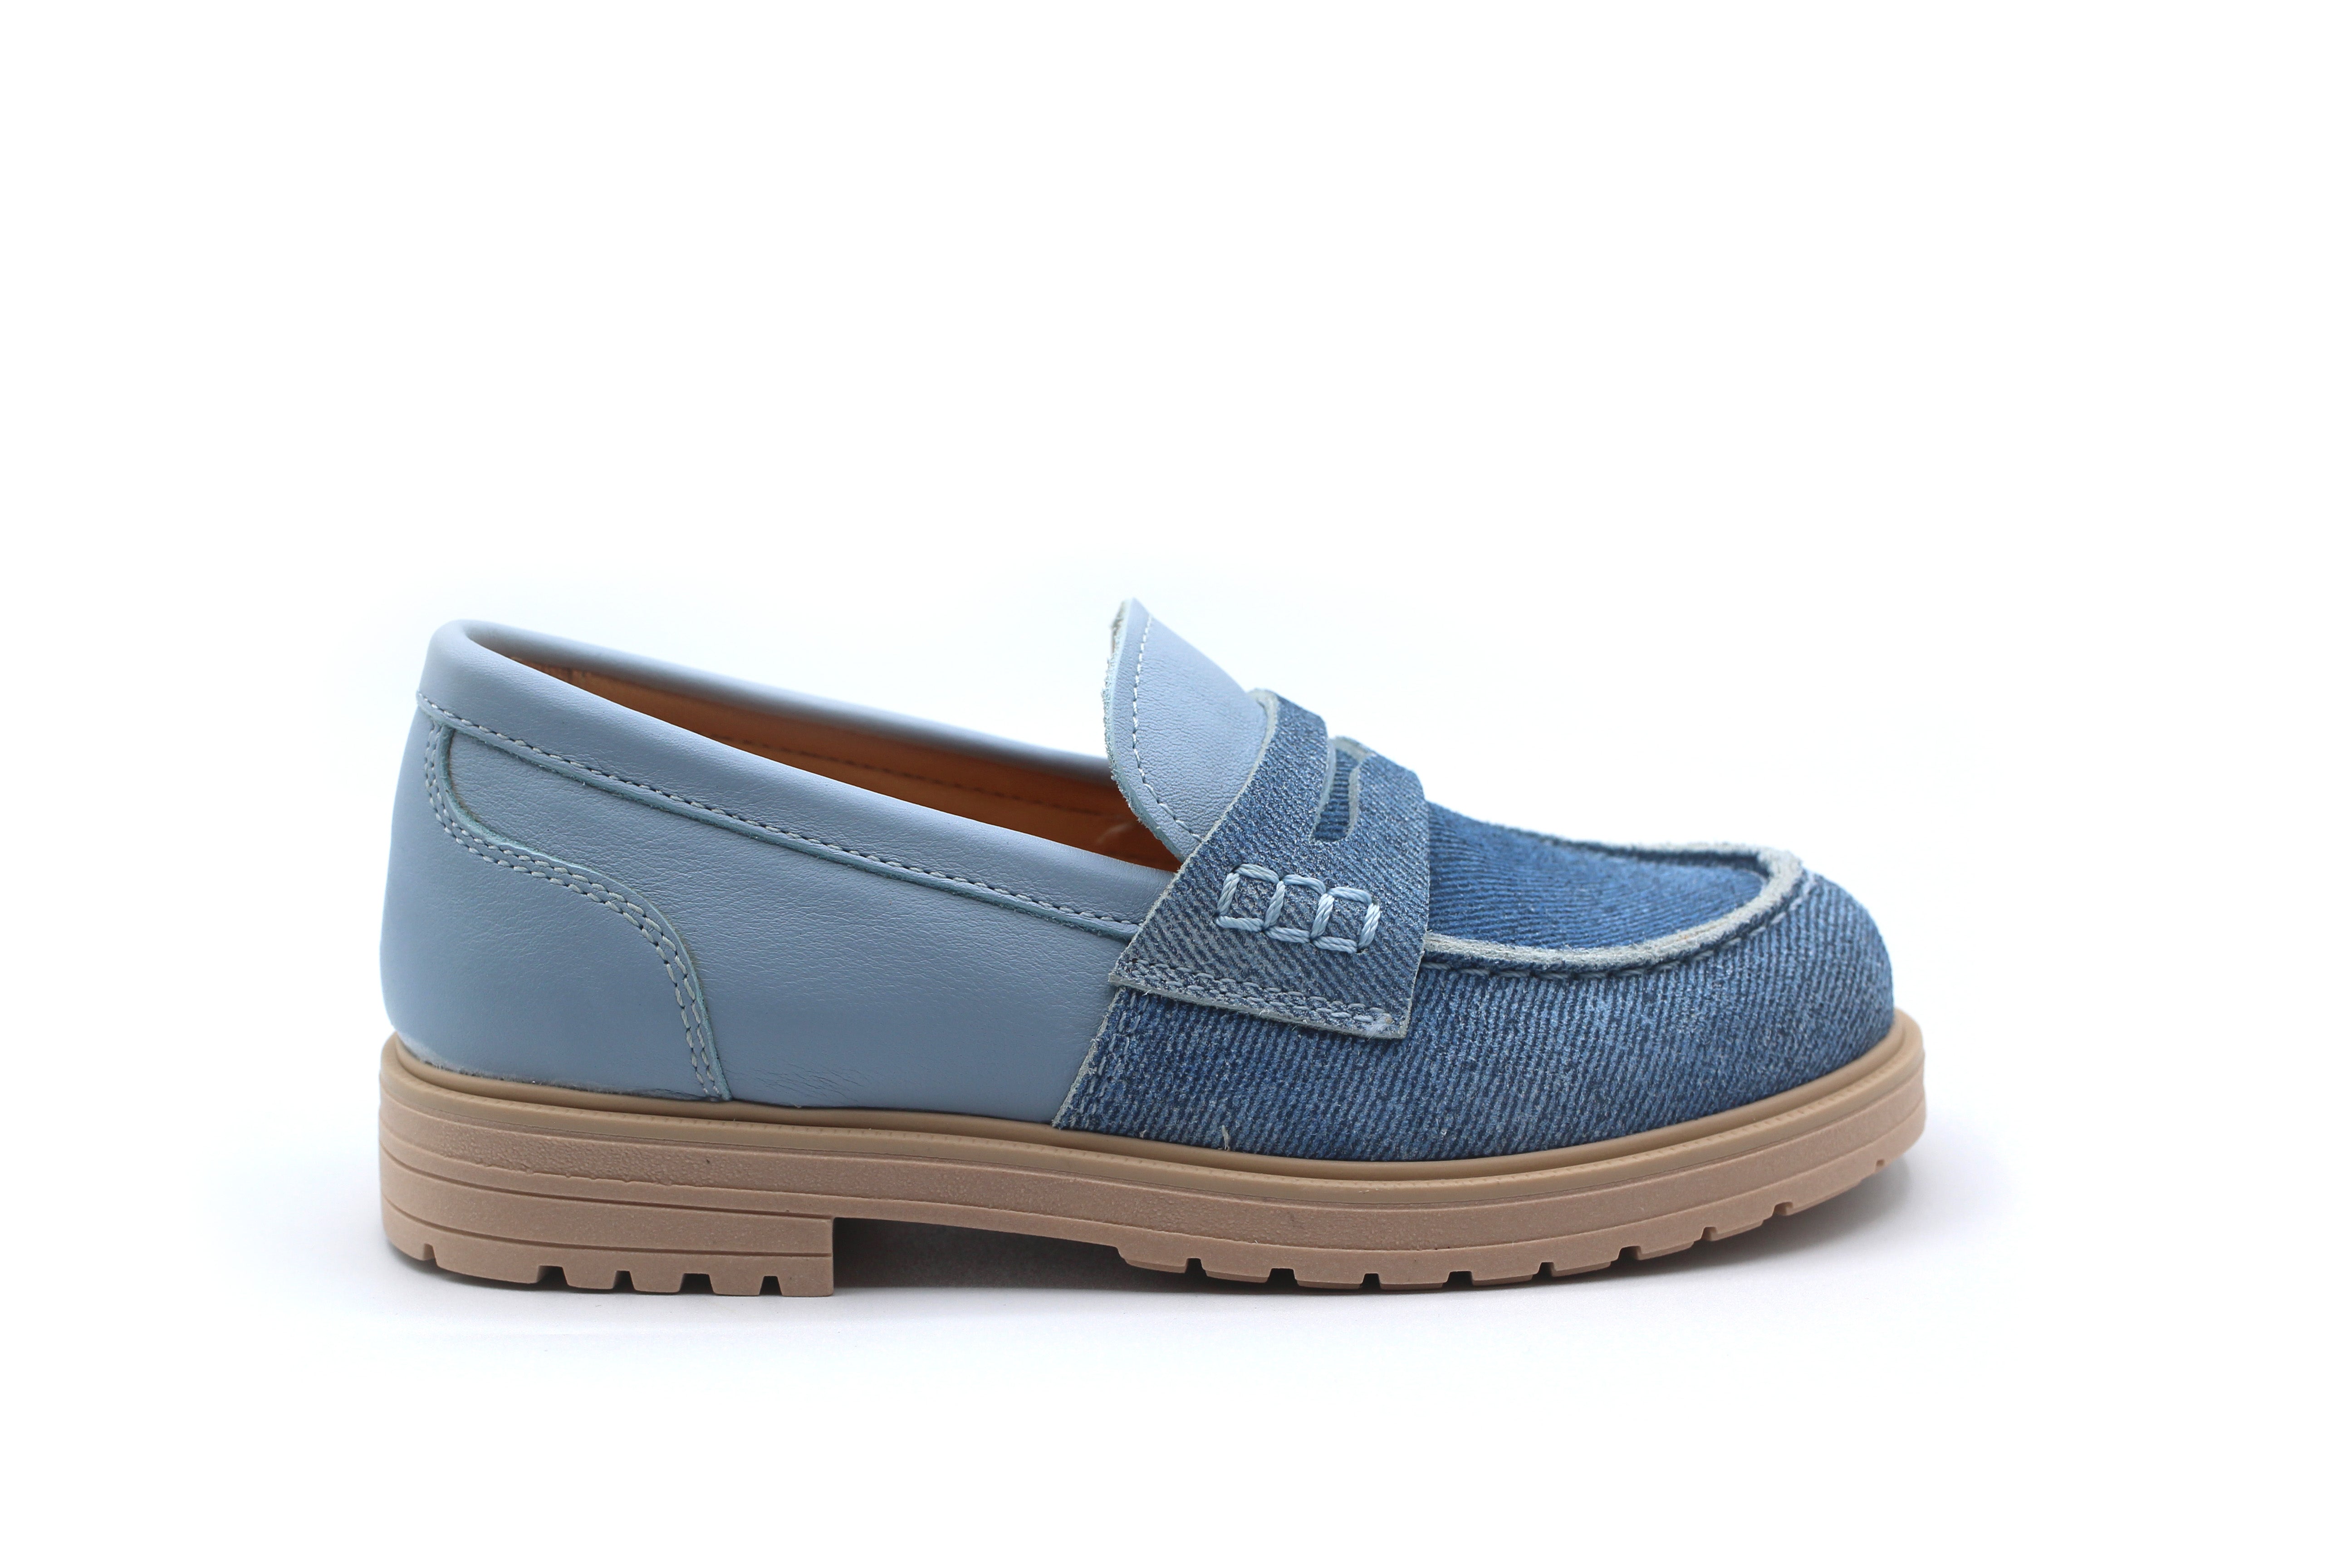 Rondinella Denim and Blue Leather Loafer